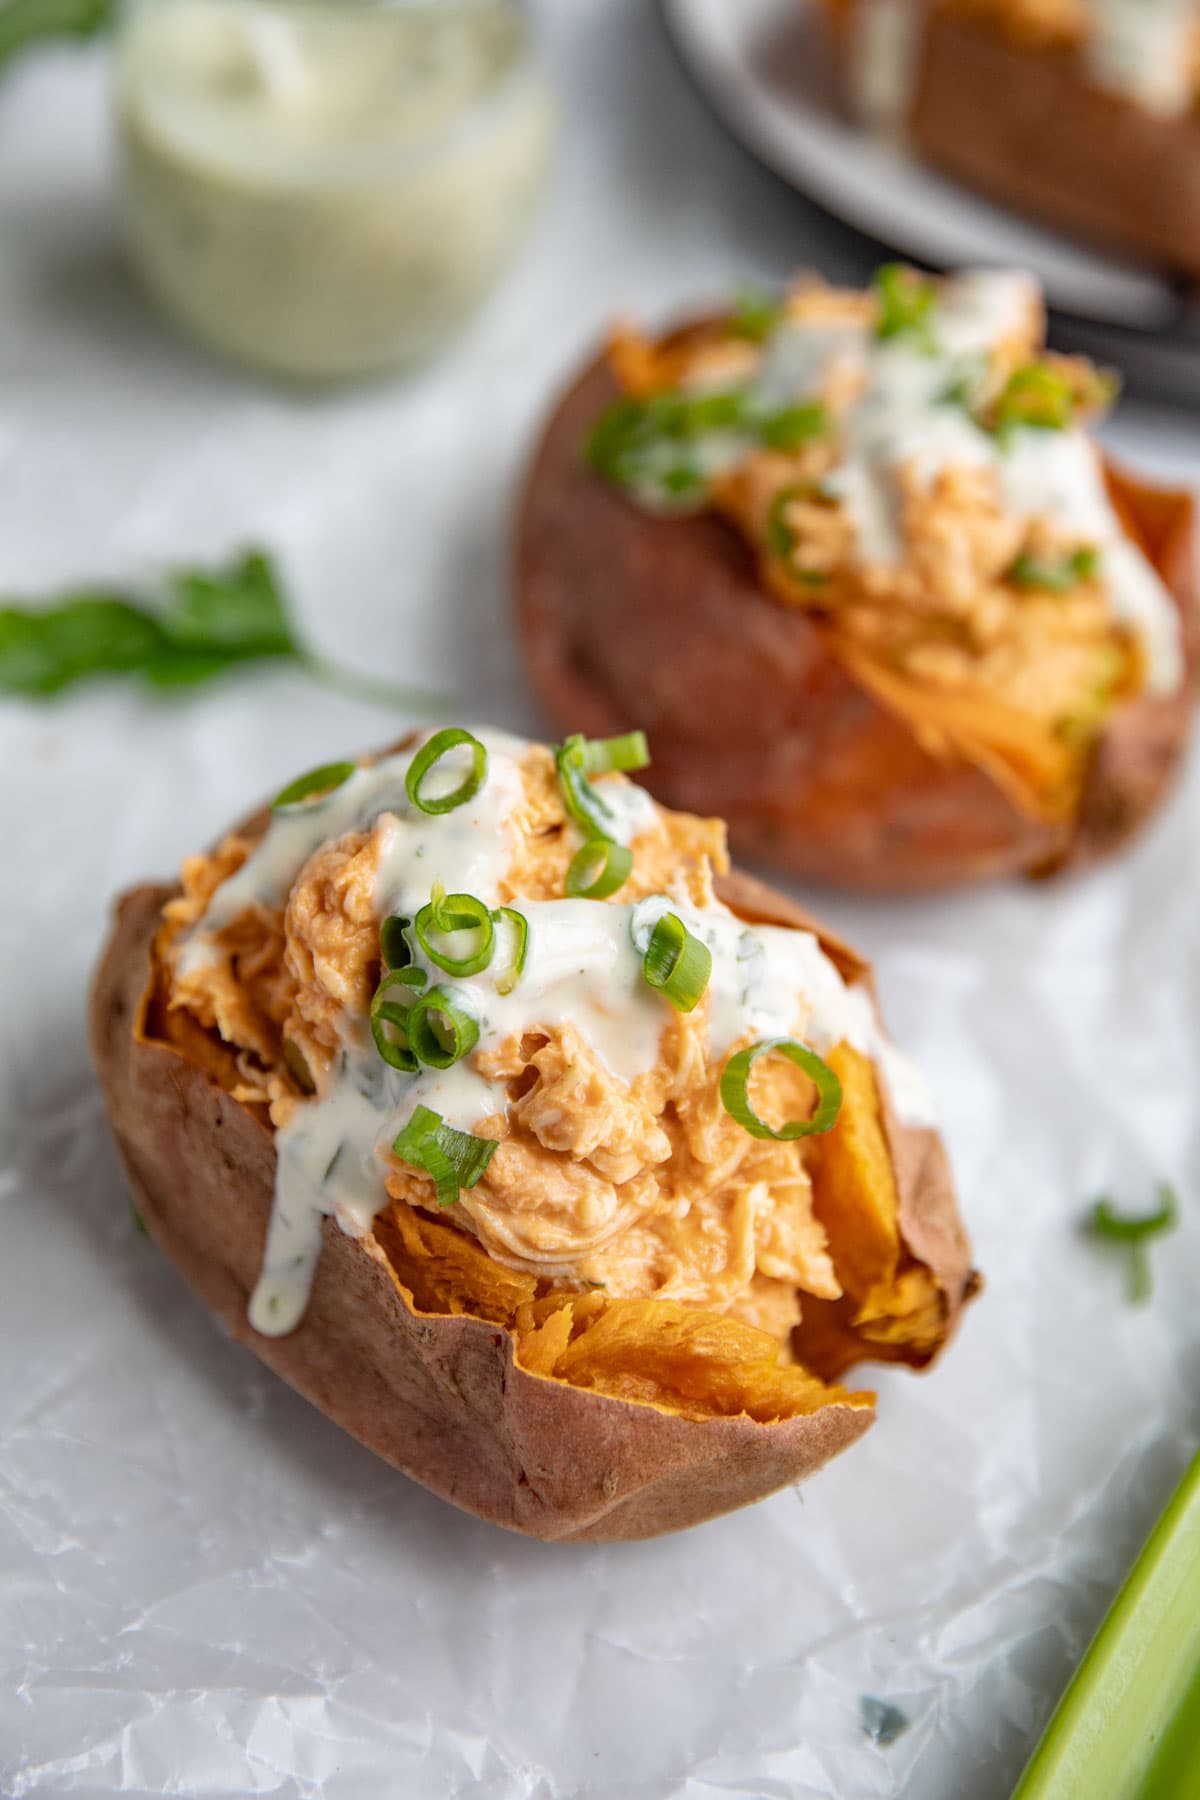 Buffalo chicken stuffed sweet potatoes topped with ranch dressing and green onions.